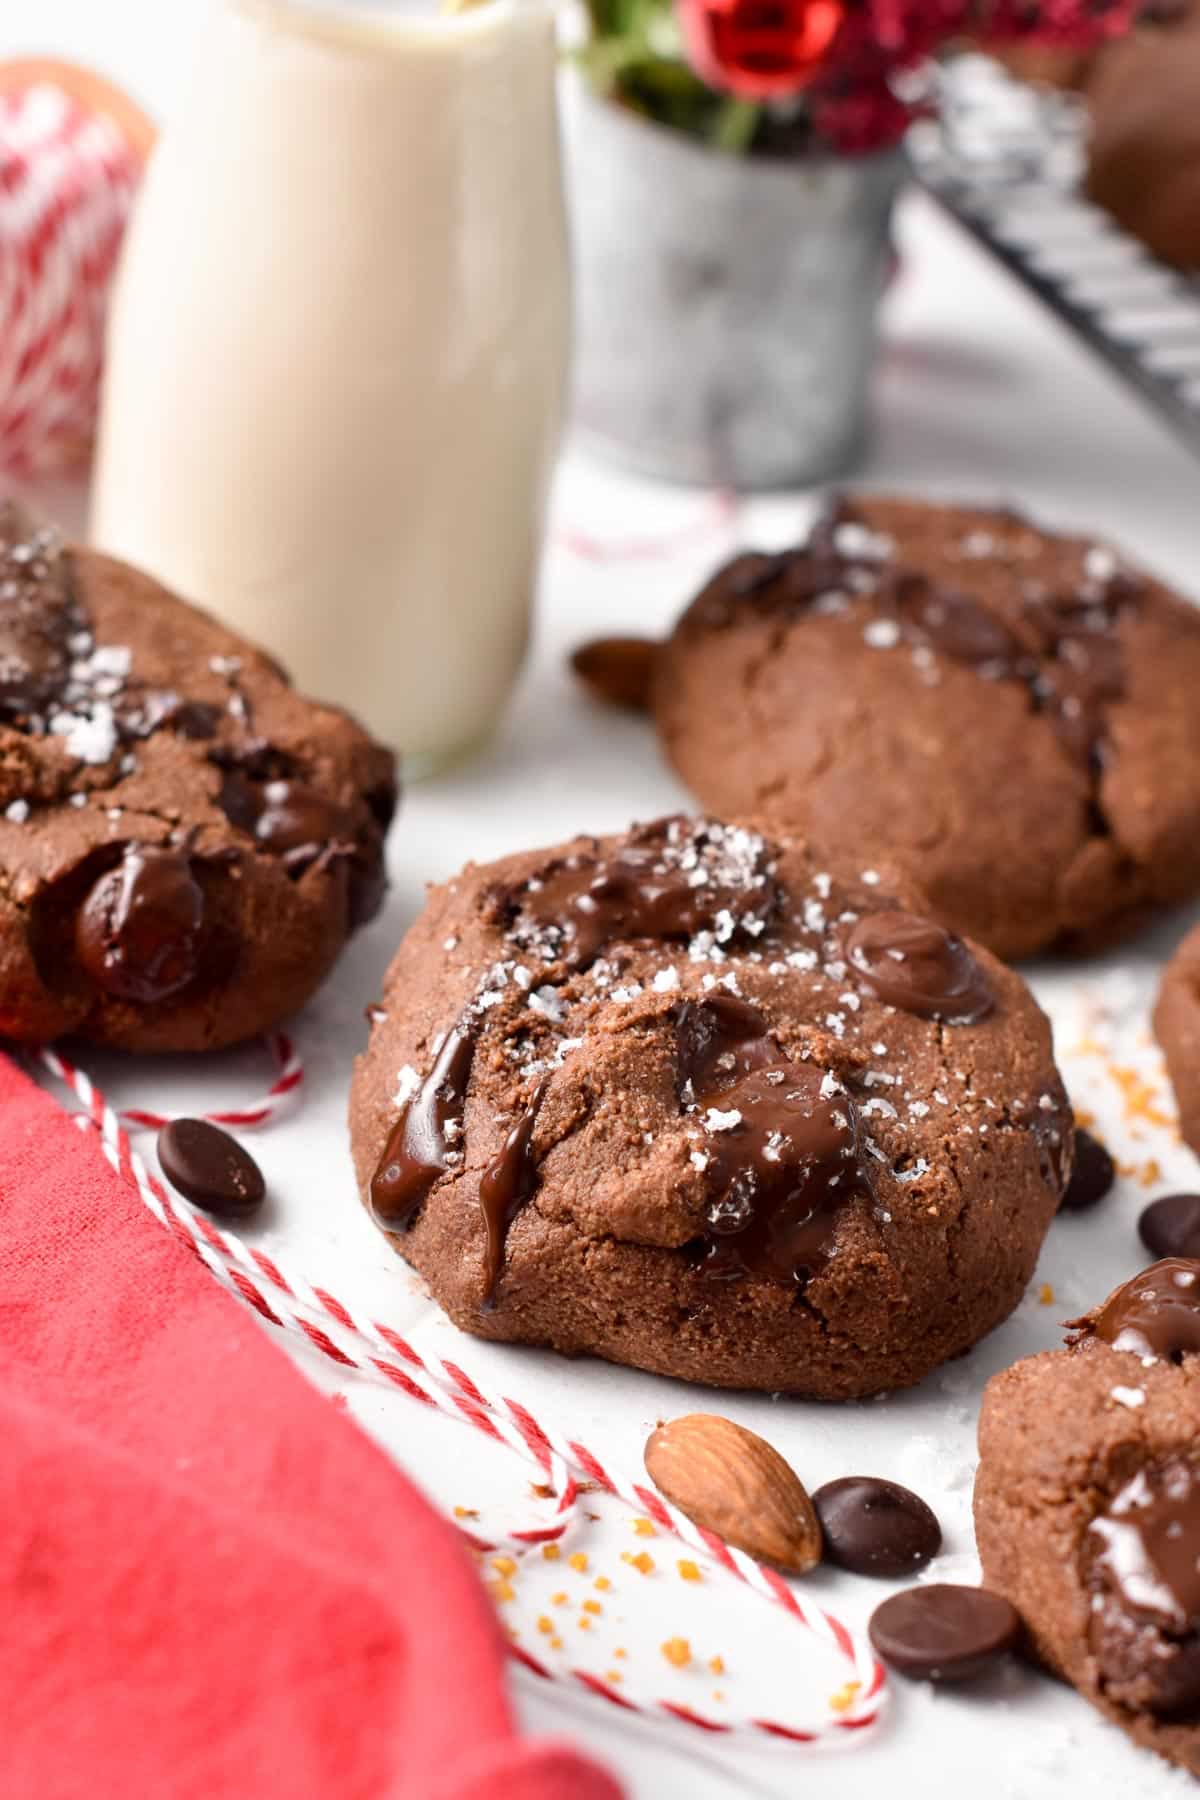 A double chocolate chip almond flour cookie with a Christmas decor.